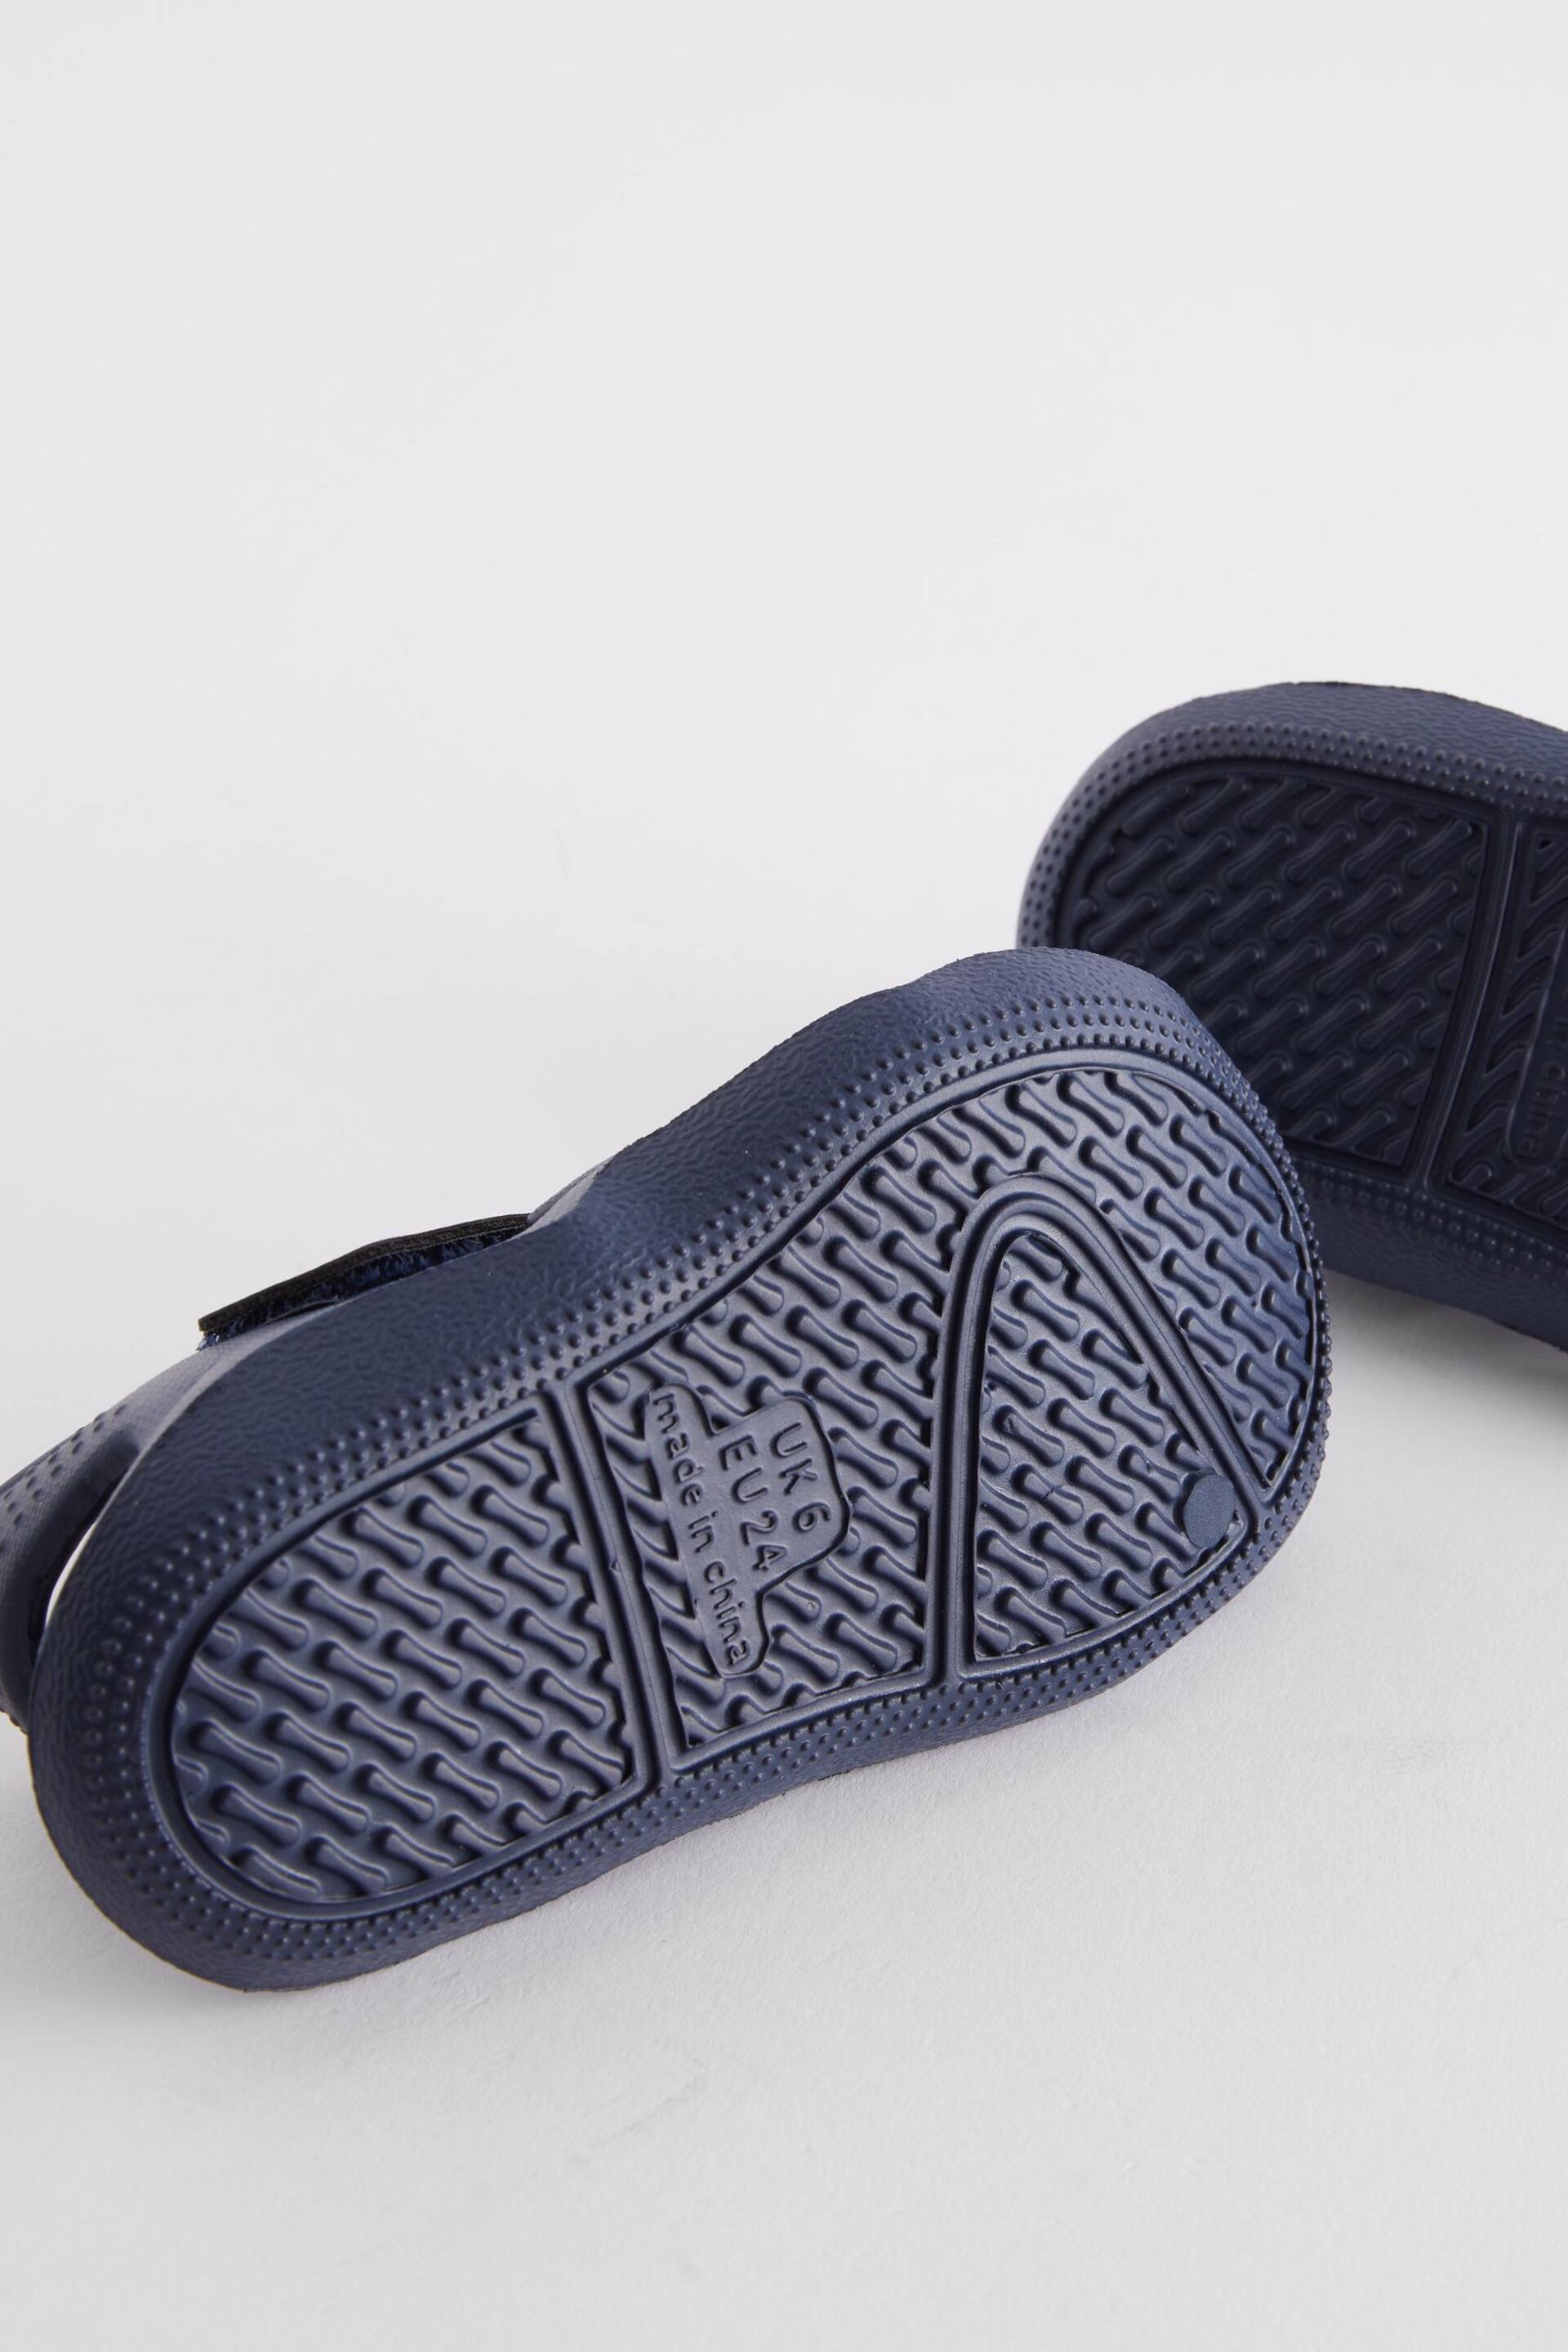 Navy Moulded Closed Toe Clogs - Image 7 of 7